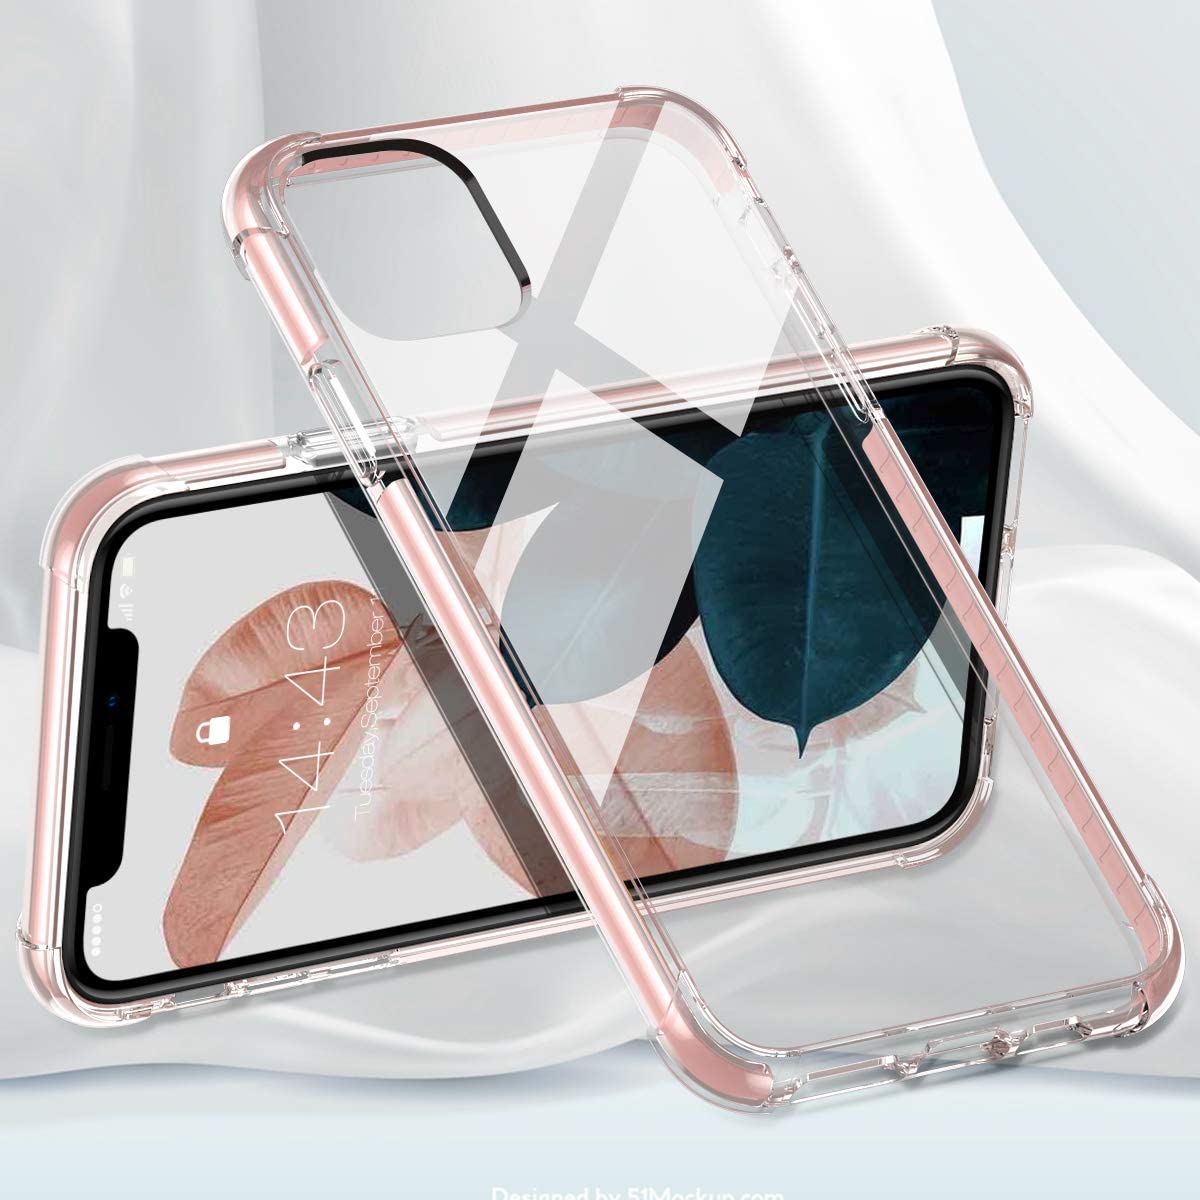 Iphone 11pro Max cases varieties - e4cents